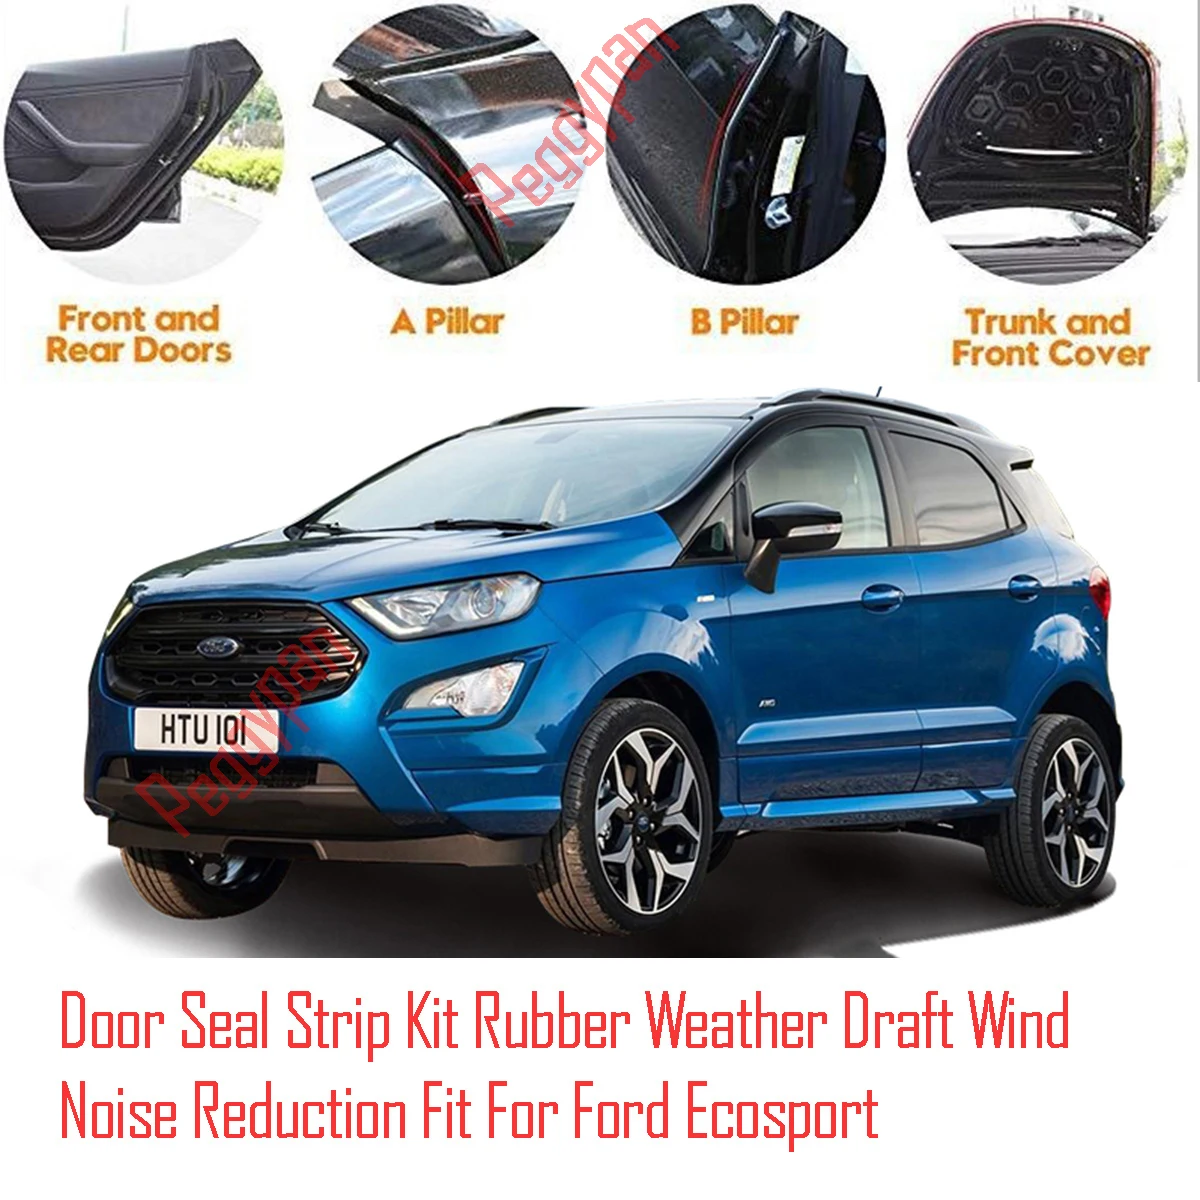 Door Seal Strip Kit Self Adhesive Window Engine Cover Soundproof Rubber Weather Draft Wind Noise Reduction Fit For Ford Ecosport